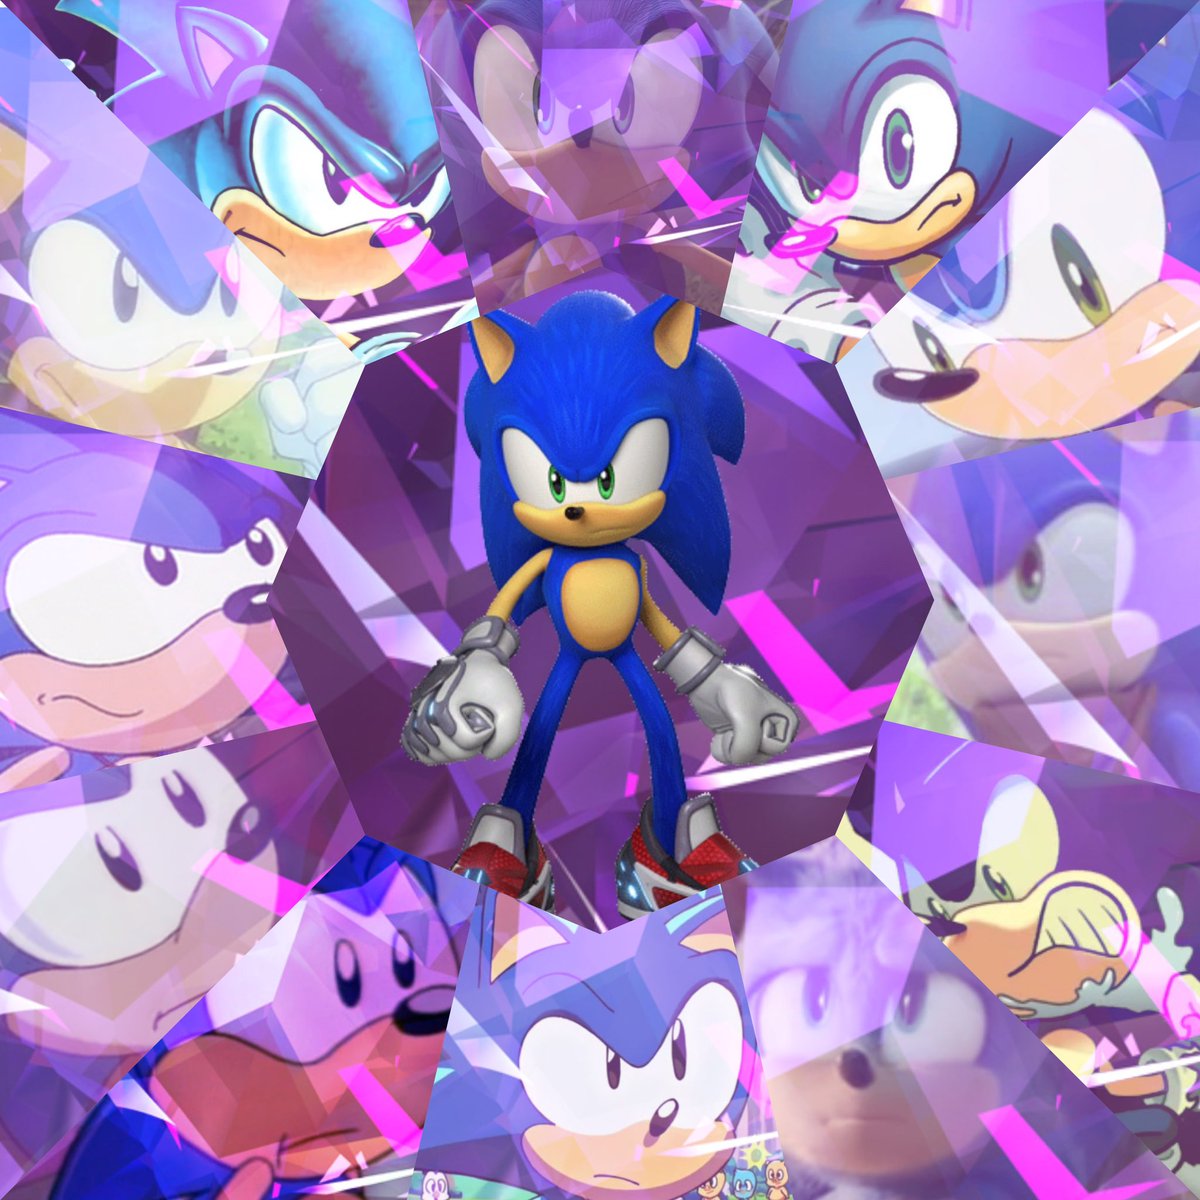 What I would like to see in Sonic prime #SonicTheHedegehog #SonicPrime #sonicboom #sonicx #sonicunderground #sonicSatAM #adventuresofsonicthehedgehog